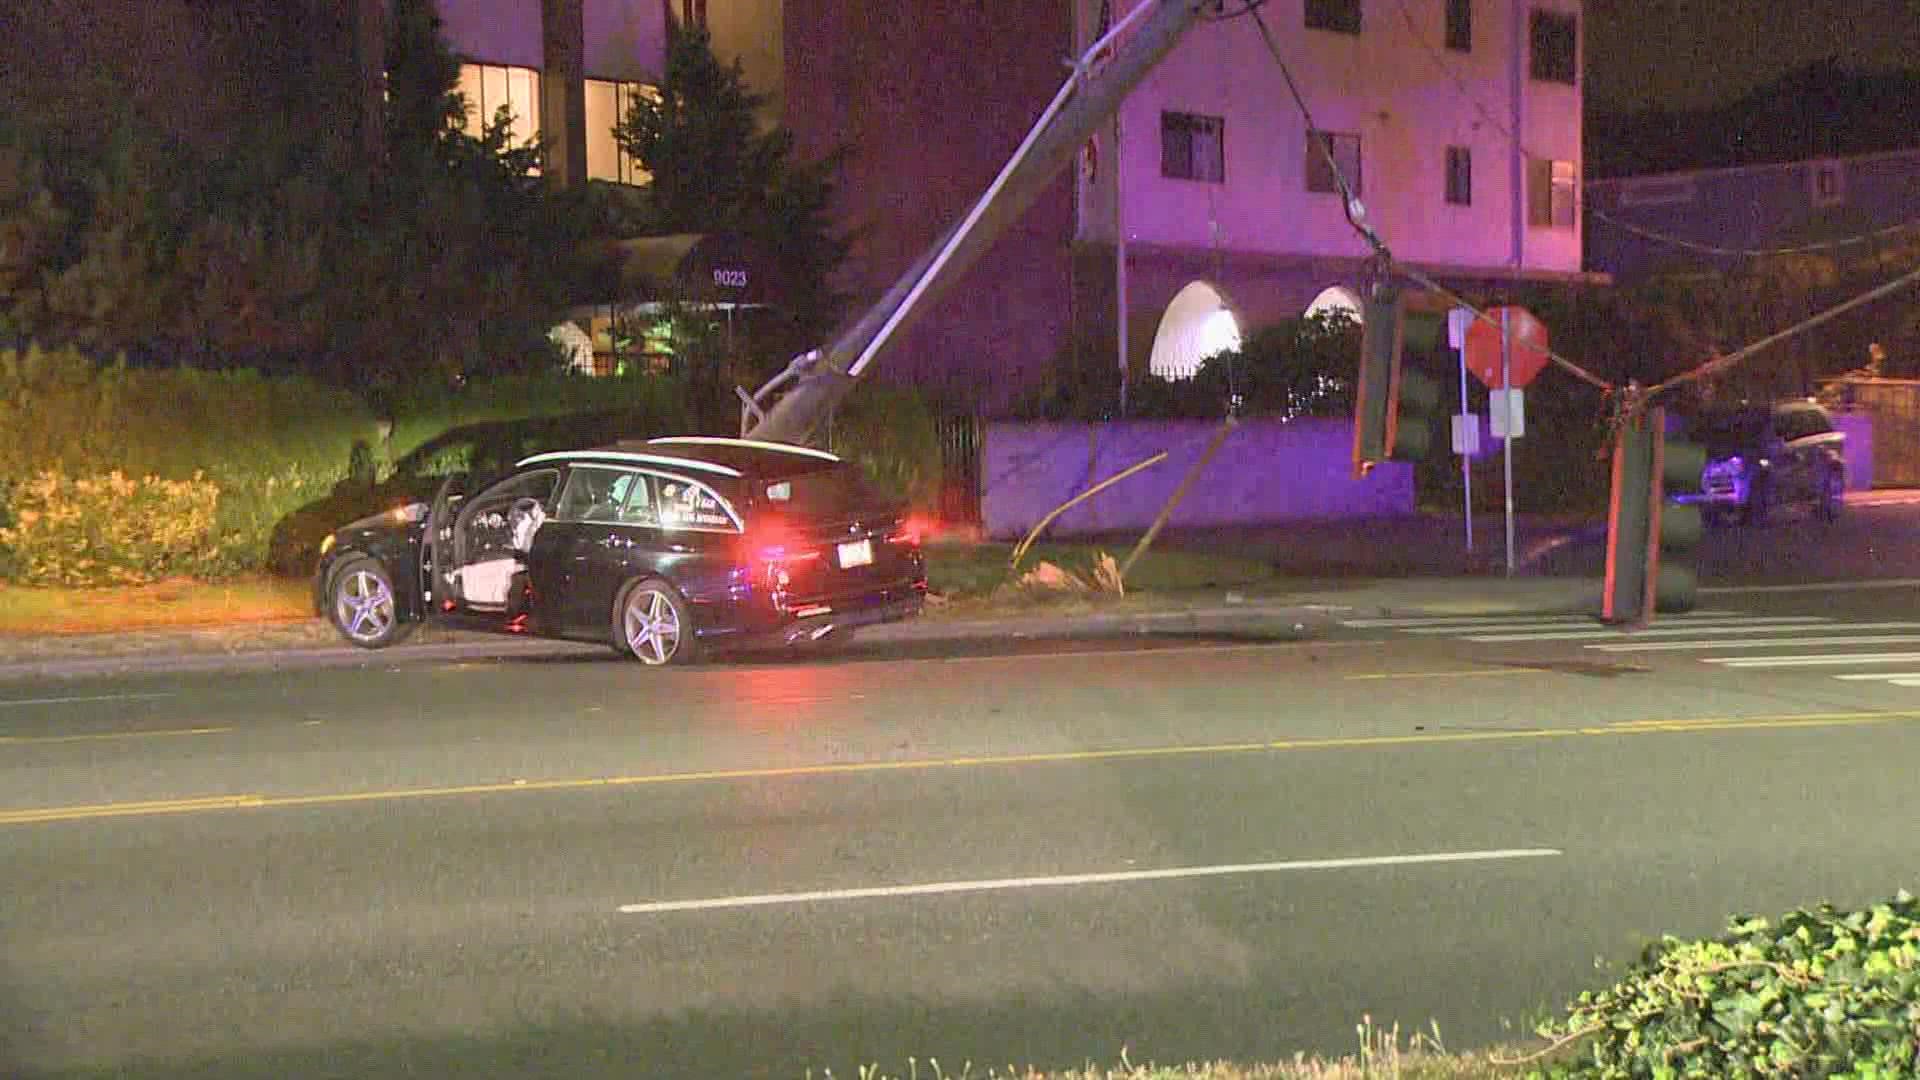 Holman Rd in north Seattle is closed in both directions at Mary Ave after a car crashed into a pole